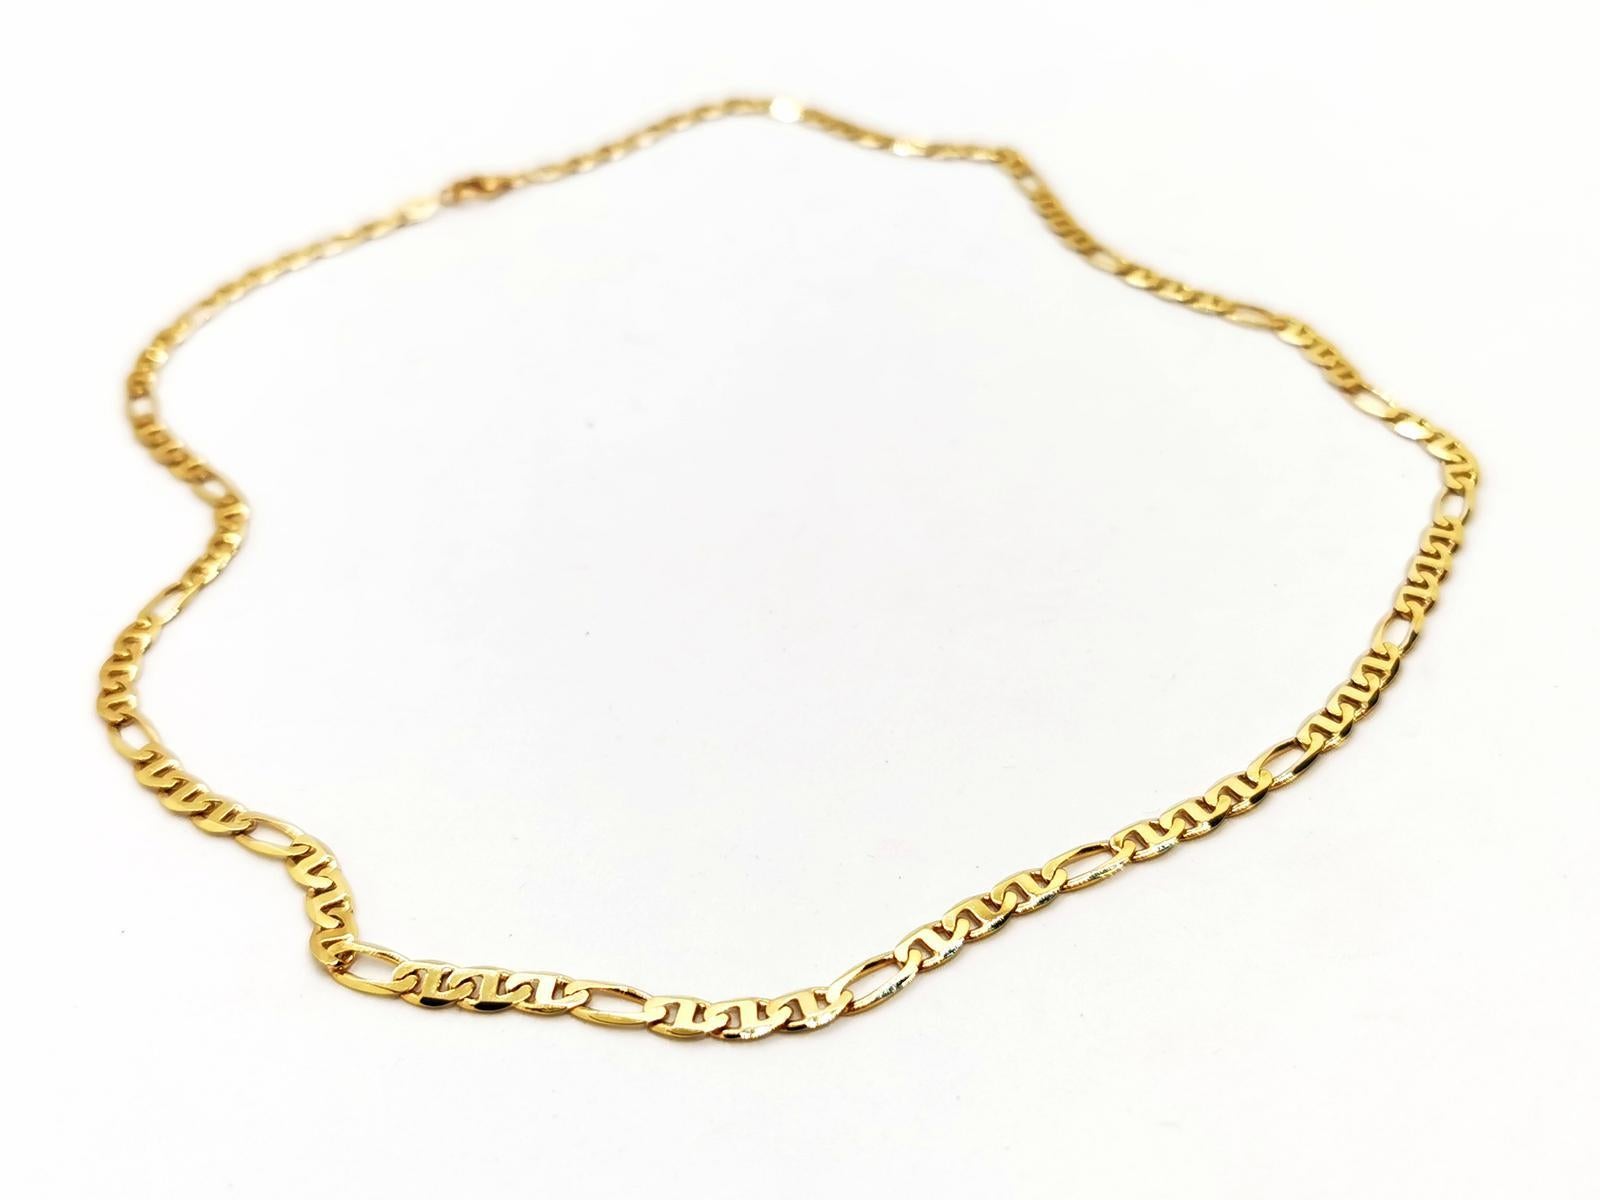 Necklace in yellow gold 750 thousandths (18 carats). figaro mesh 2x1. length: 45cm. width: 0.39cm. Link thickness: 0.10cm. weight: 11.95gr. eagle head hallmark. excellent condition.
